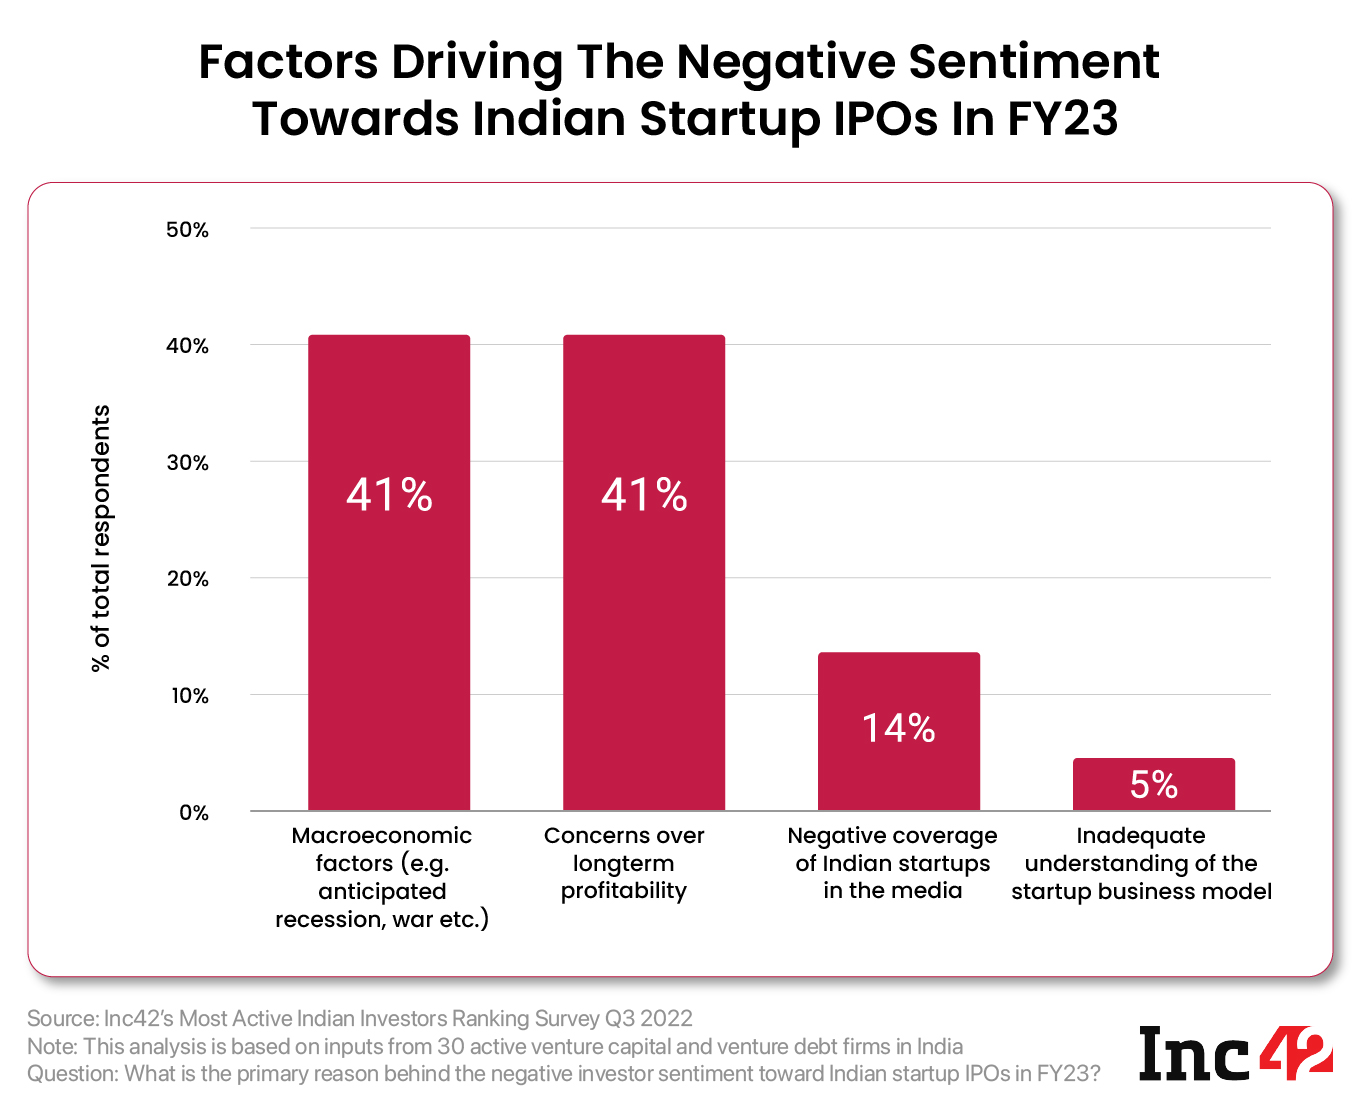 Factors that are driving a negative sentiment among investors for startups going public